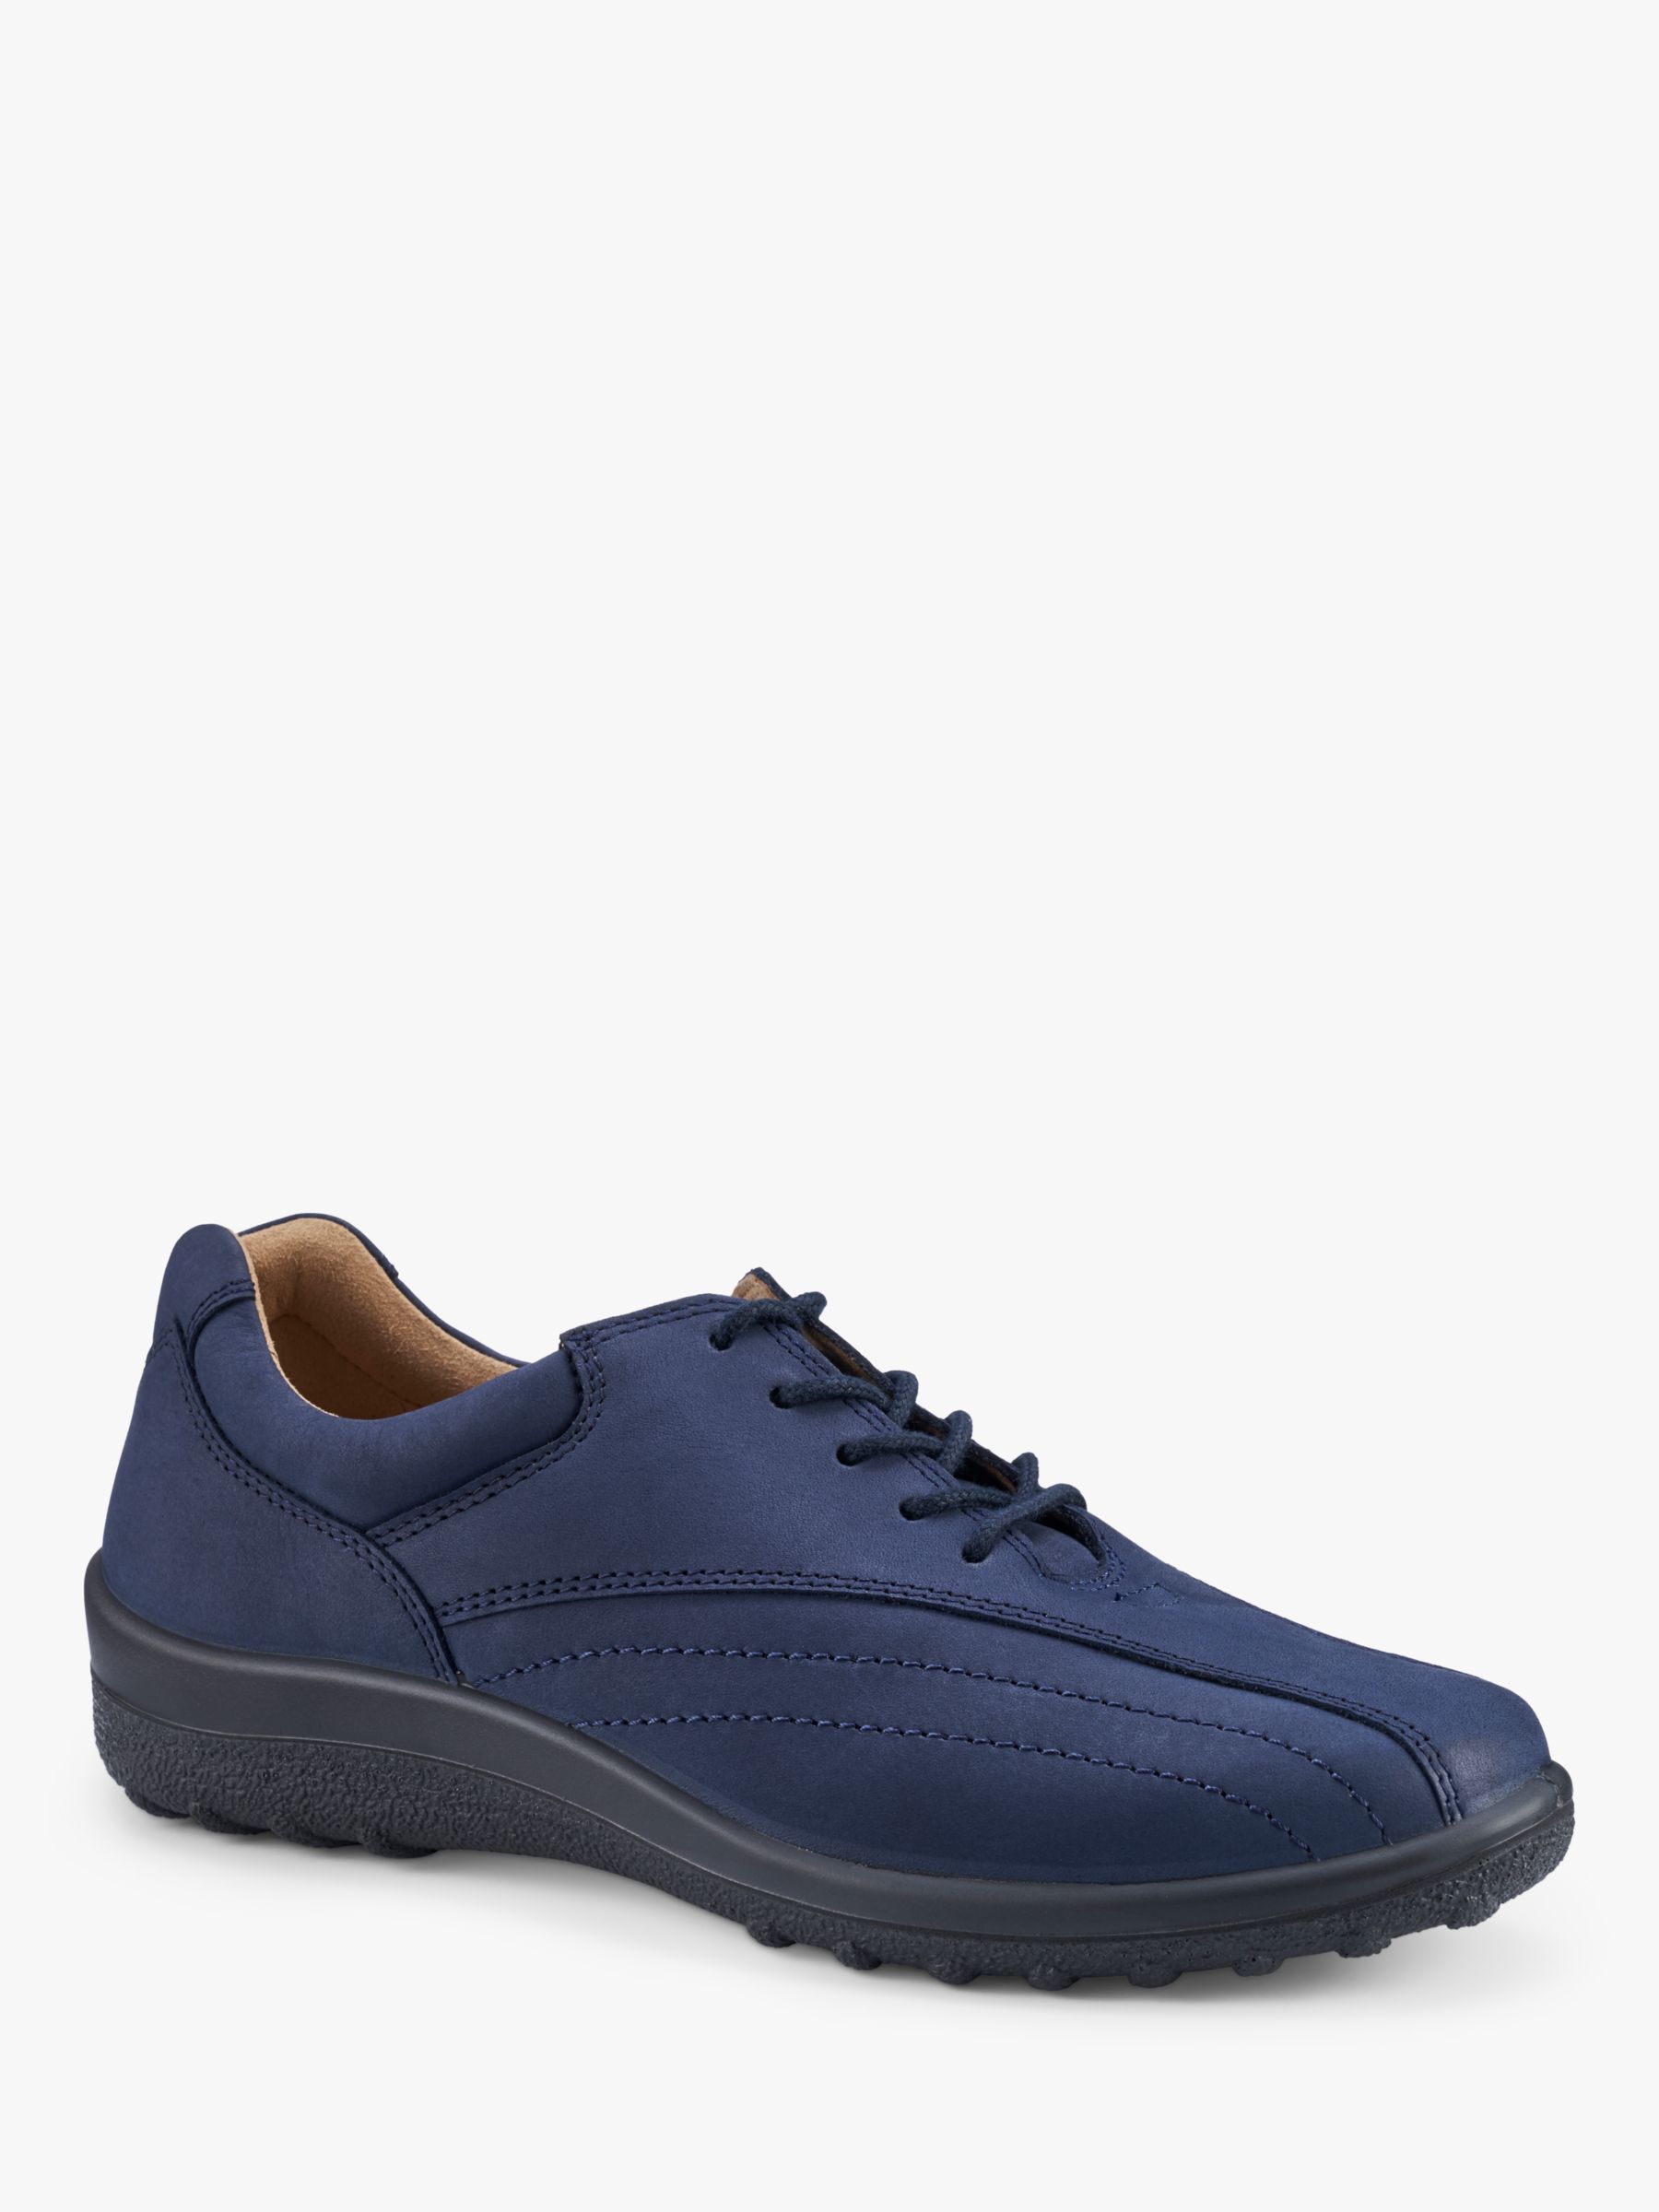 Buy Hotter Tone II Classic Nubuck Bowling Style Shoes, Denim Navy Online at johnlewis.com